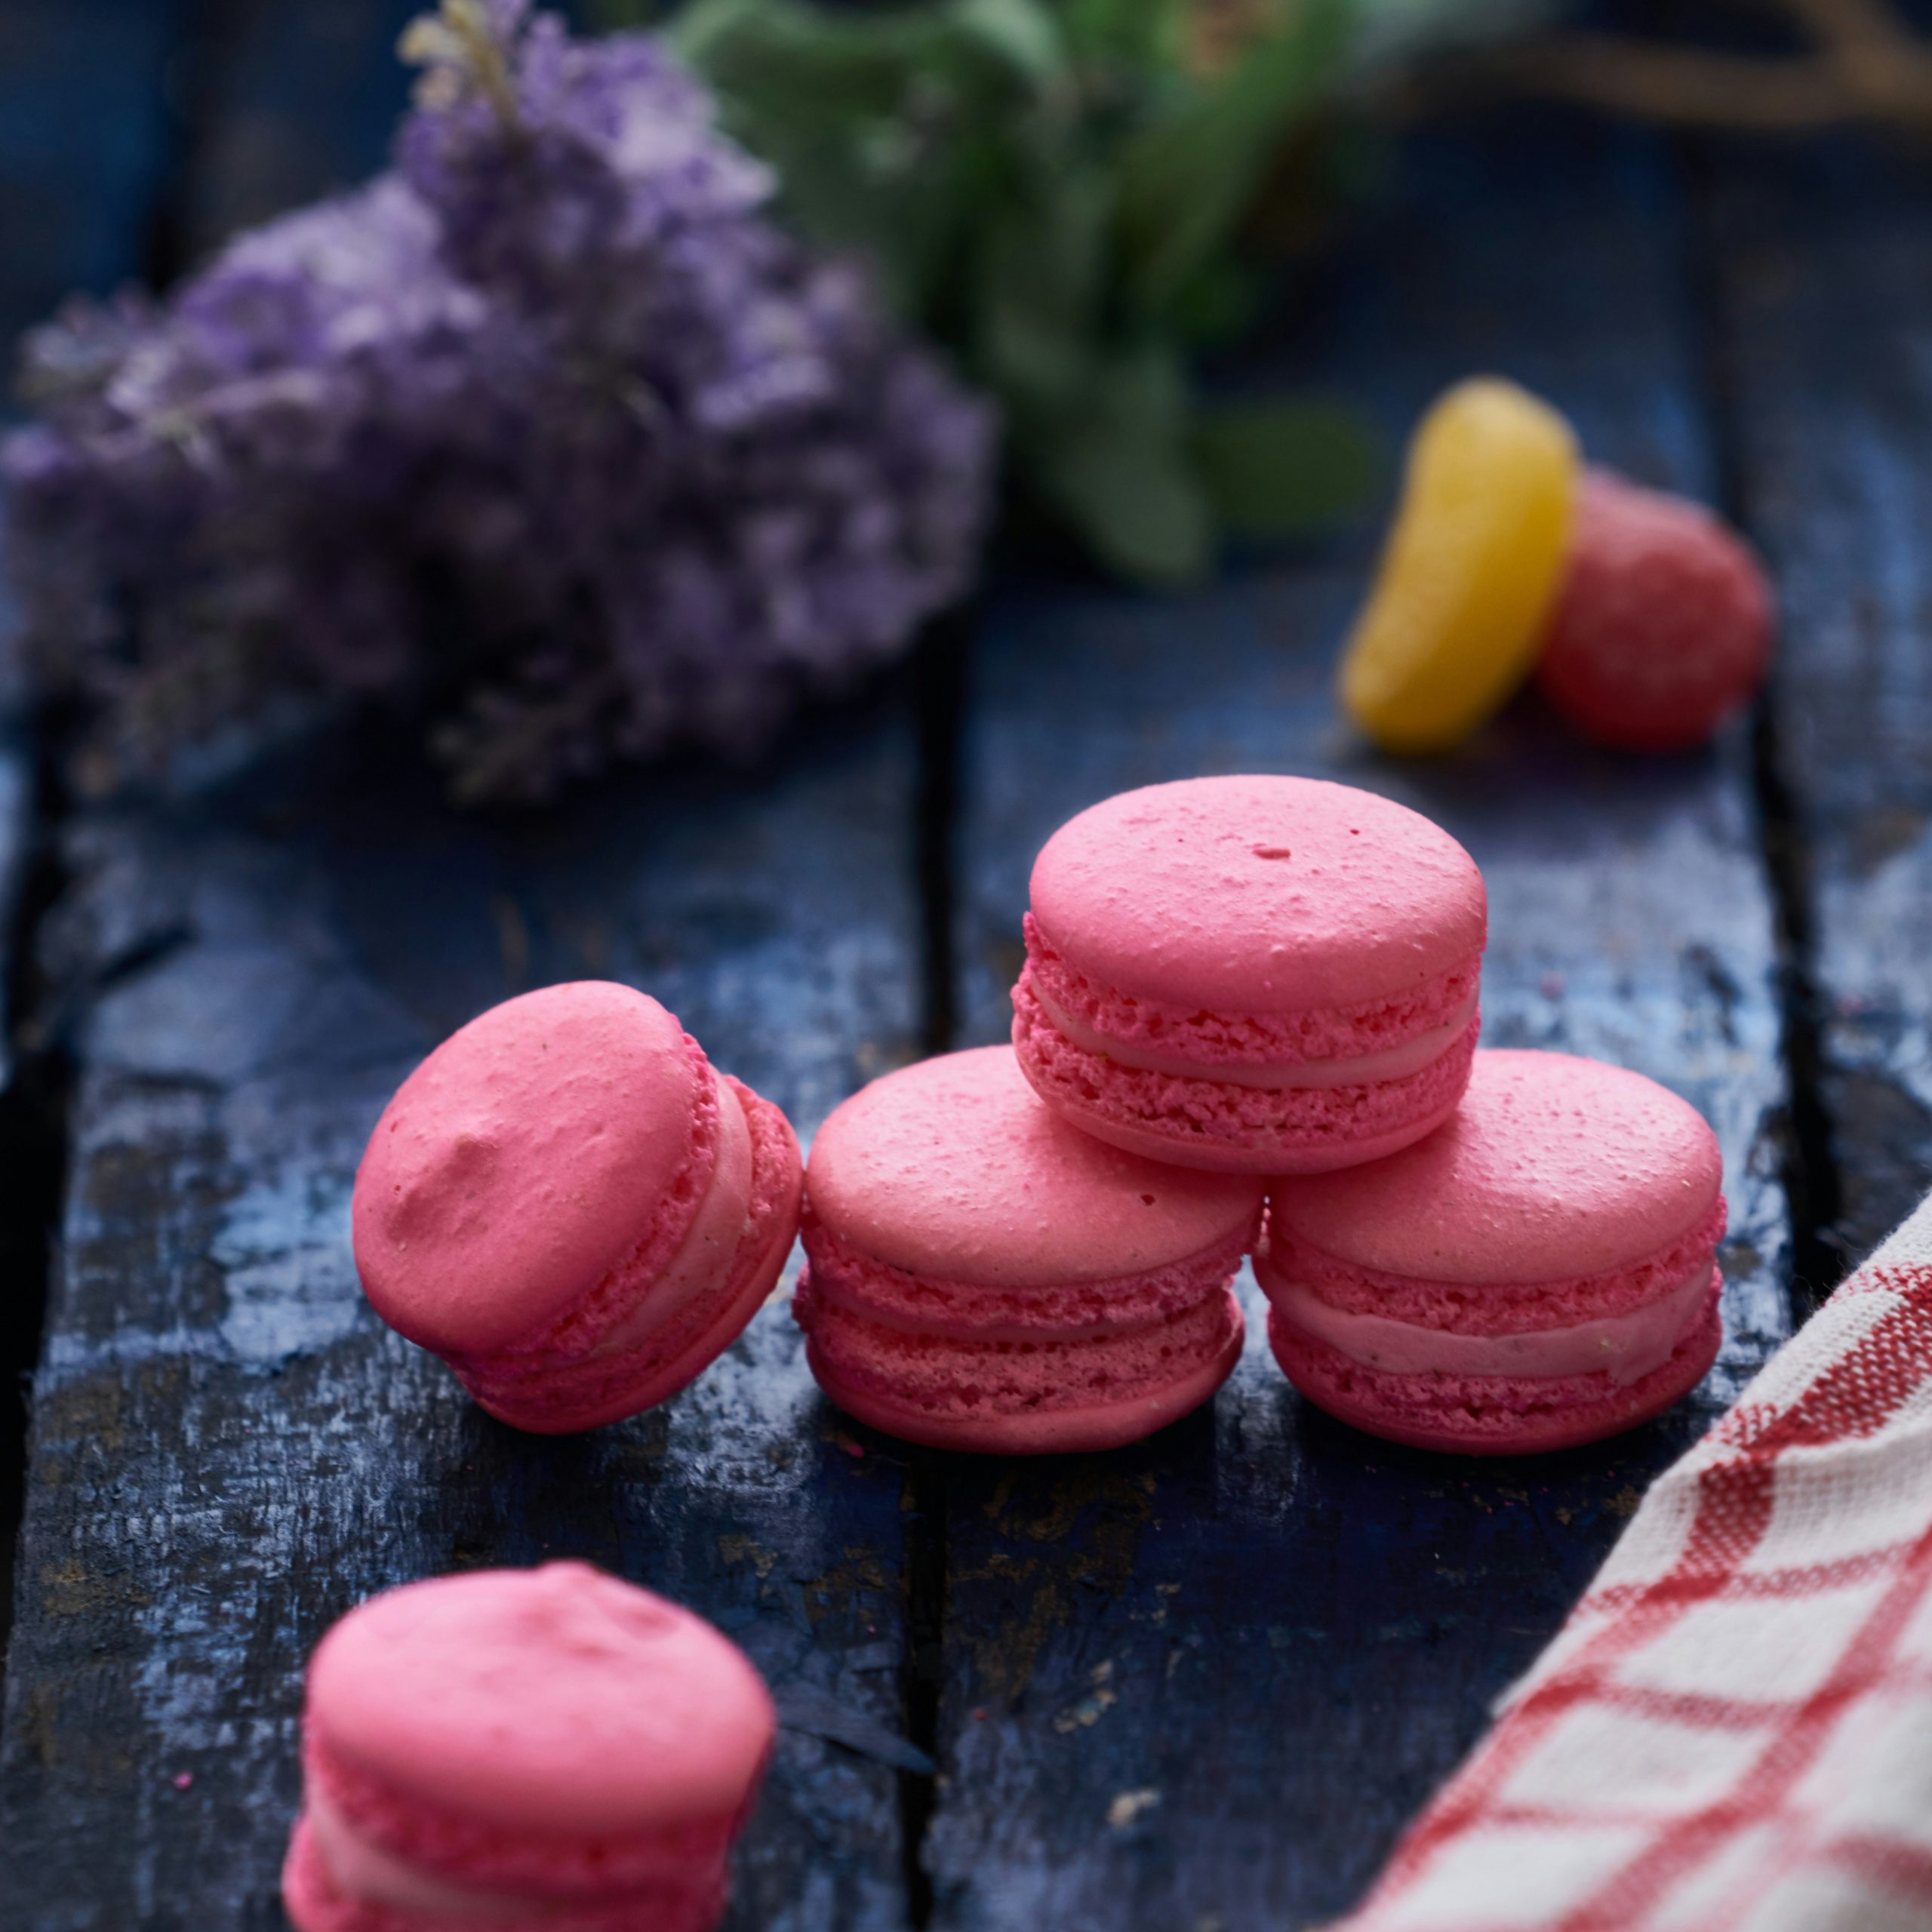 Pink macaroons with lavender in the background